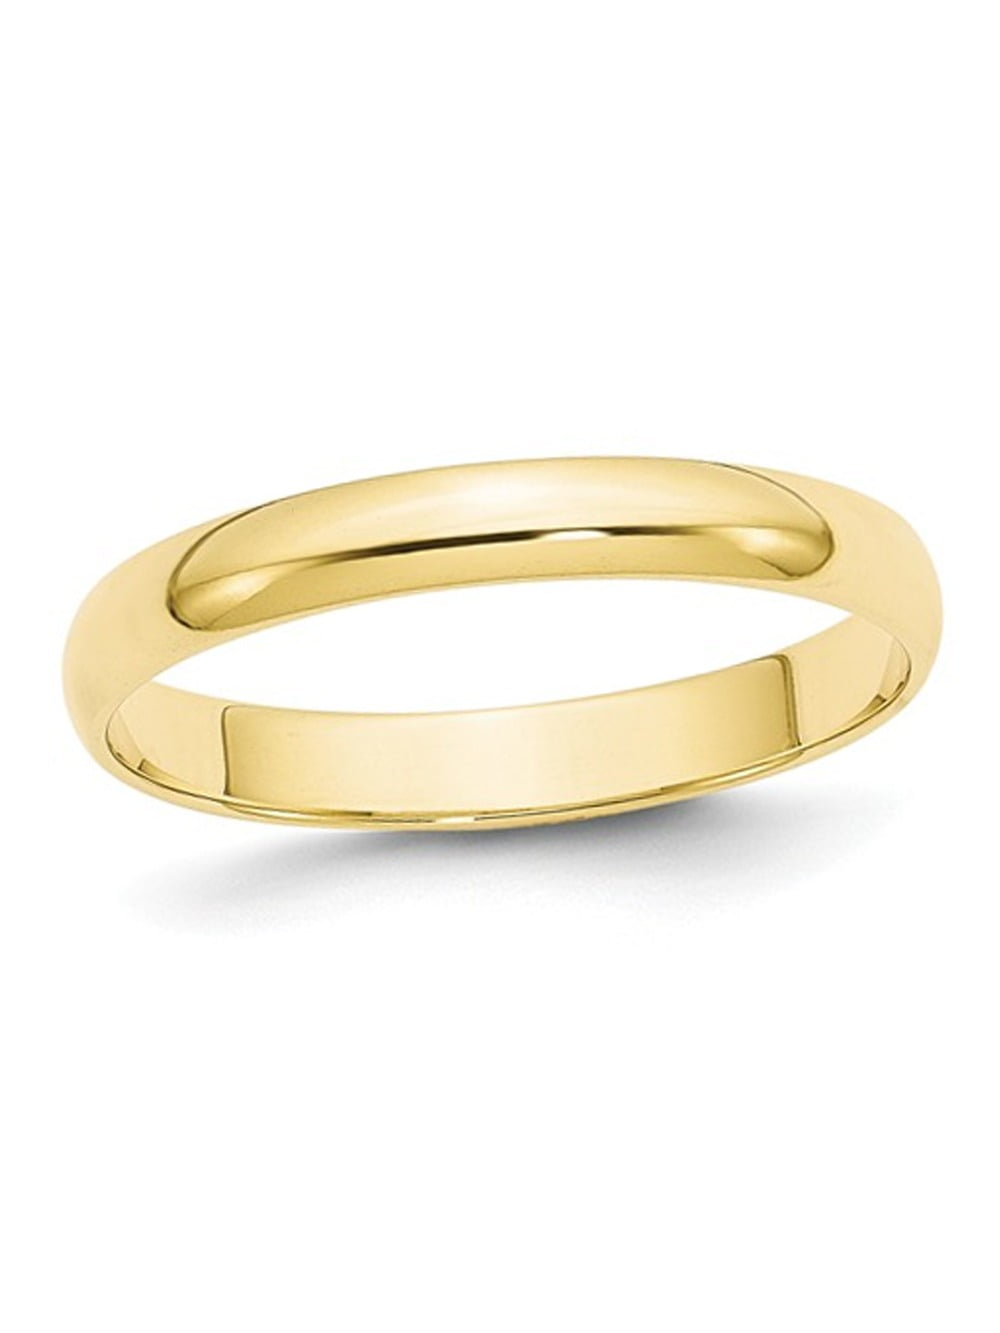 14k Solid Yellow Gold Comfort Fit plain Wedding band 3mm size 4-10 high polished 